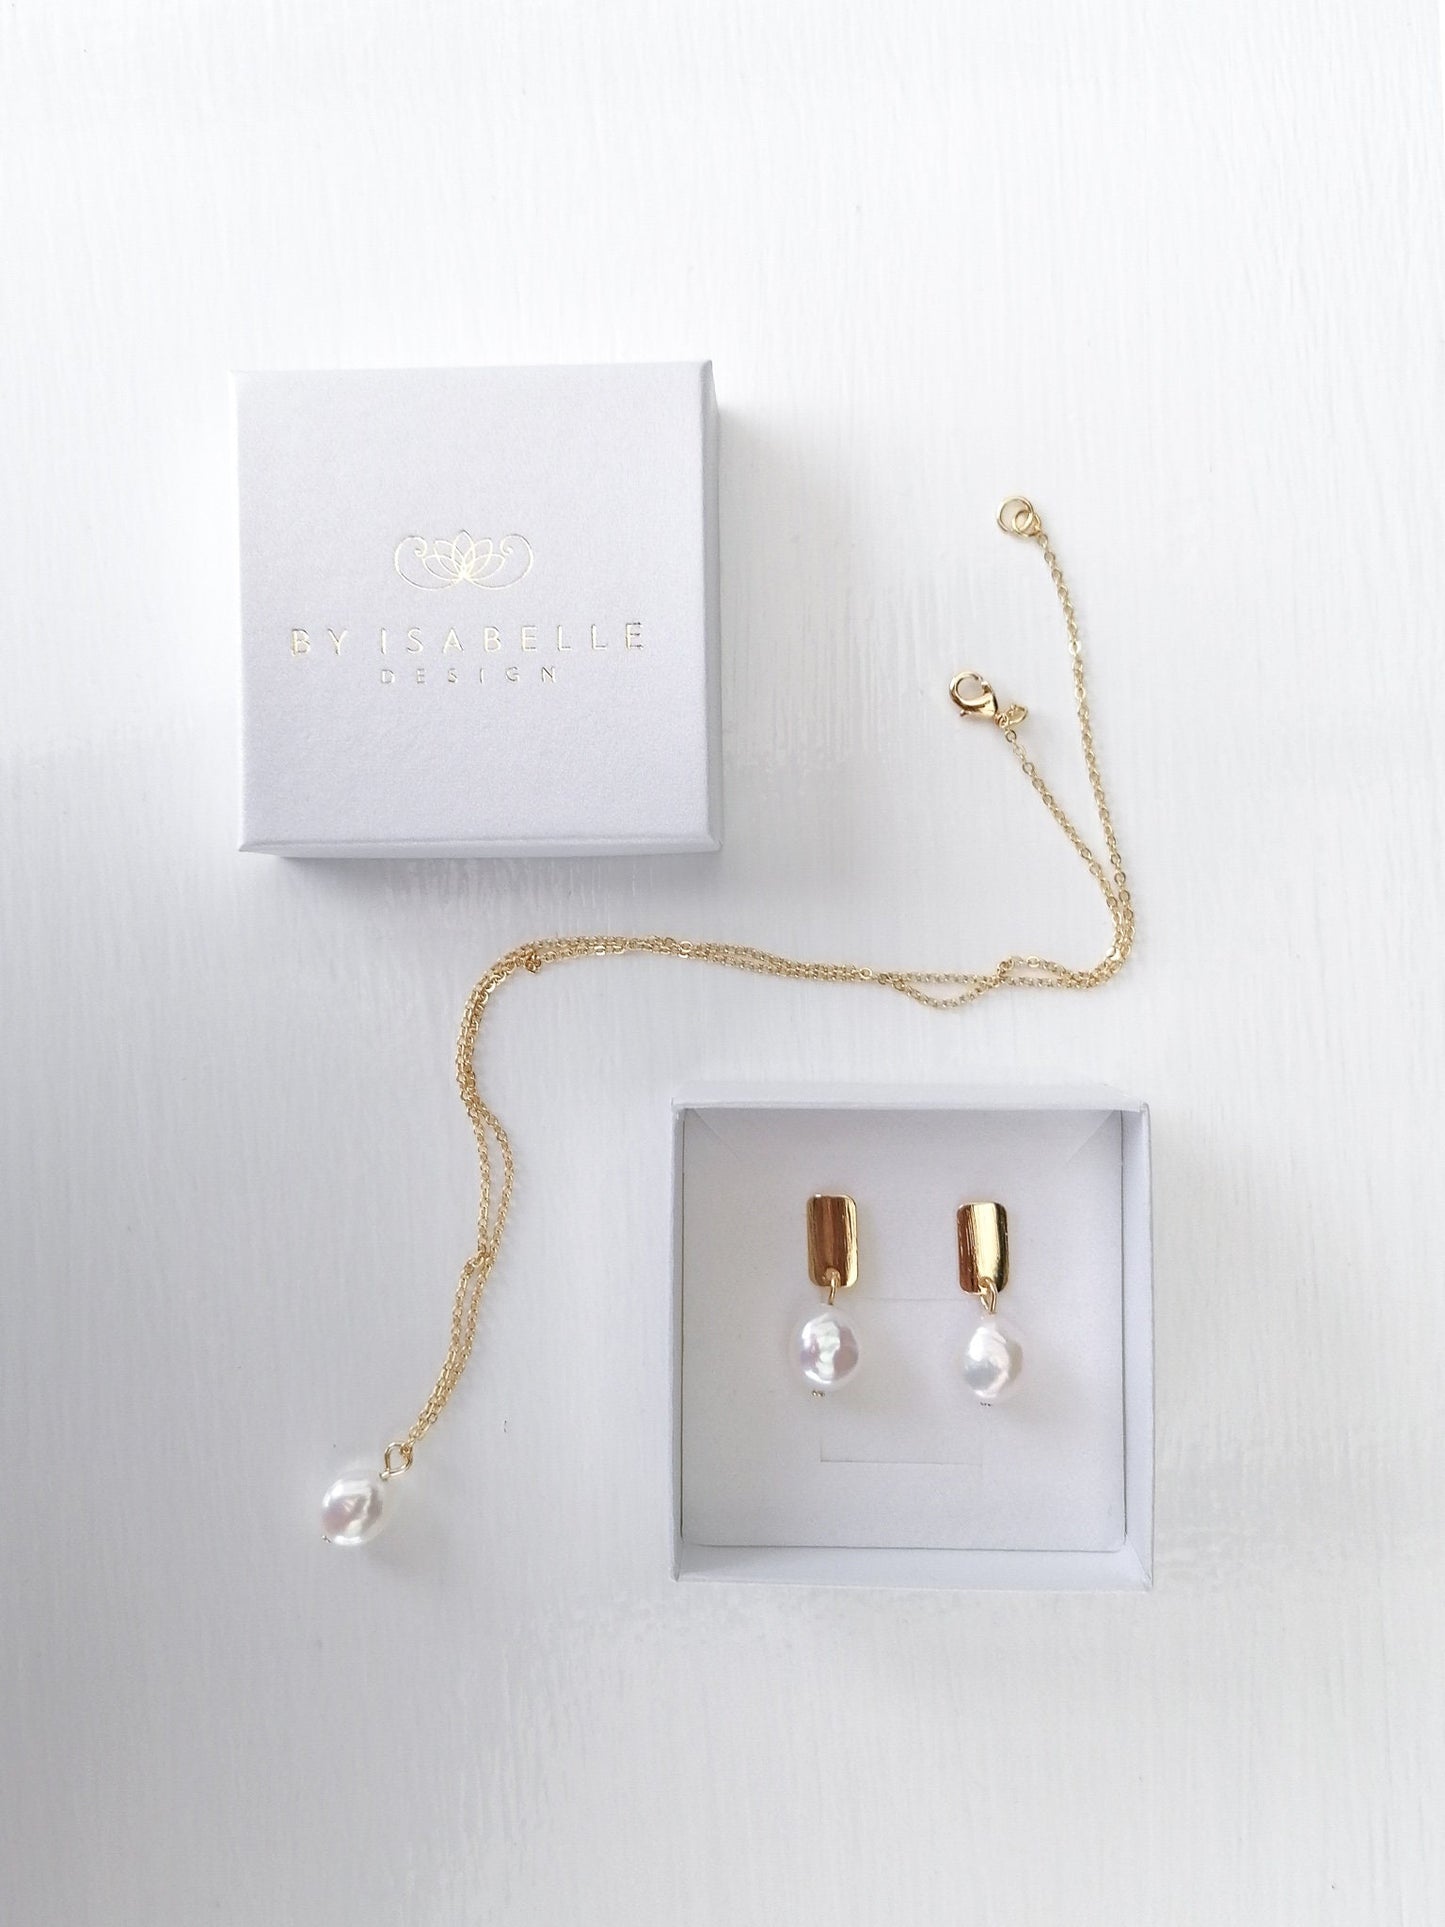 Thea earrings - gold filled